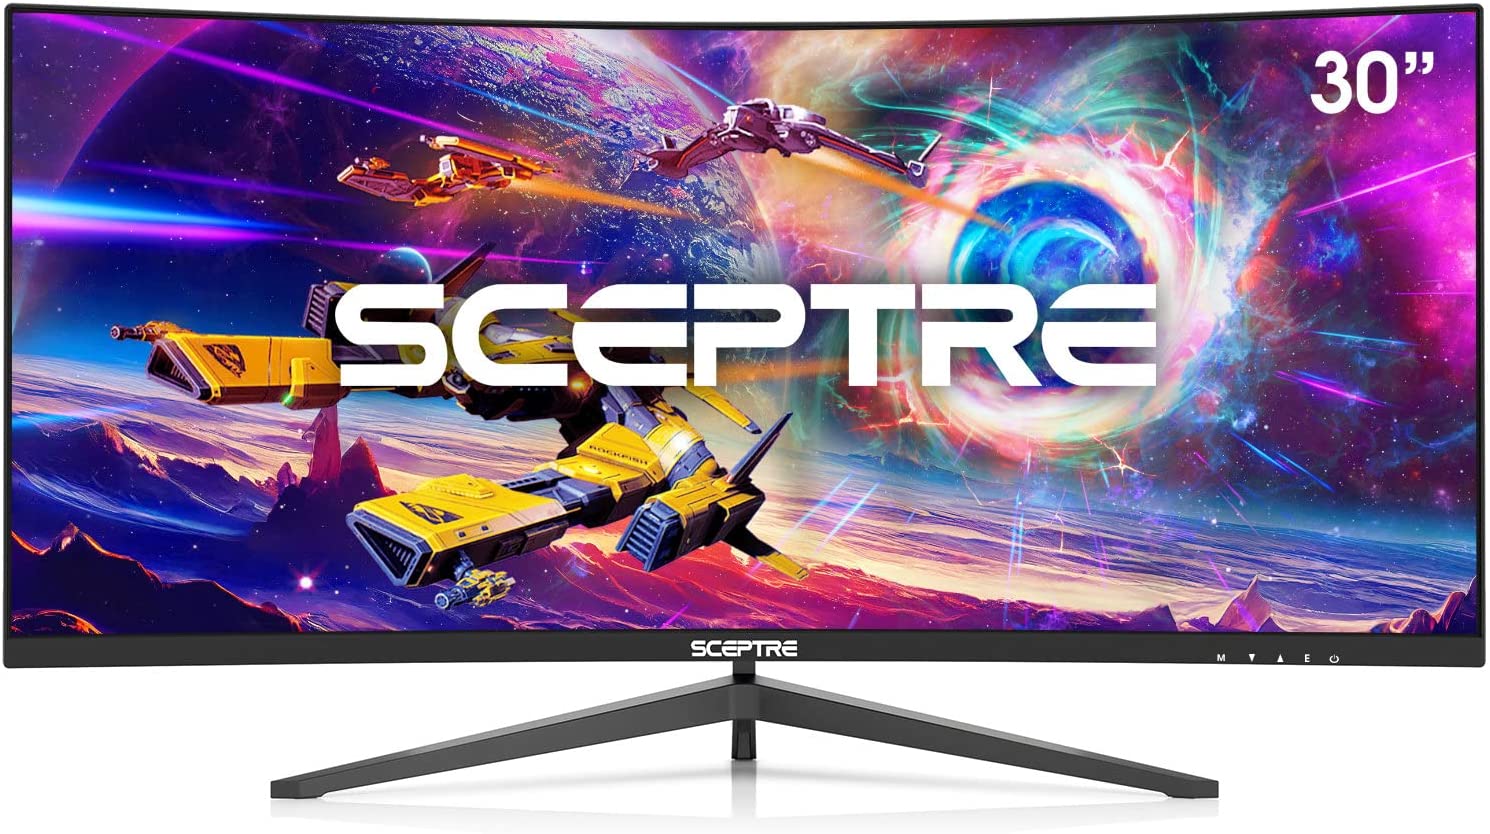 Sceptre 30-inch Curved Gaming Monitor 21:9 2560x1080 Ultra Wide/ Slim HDMI DisplayPort up to 200Hz Build-in Speakers, Metal Black $170